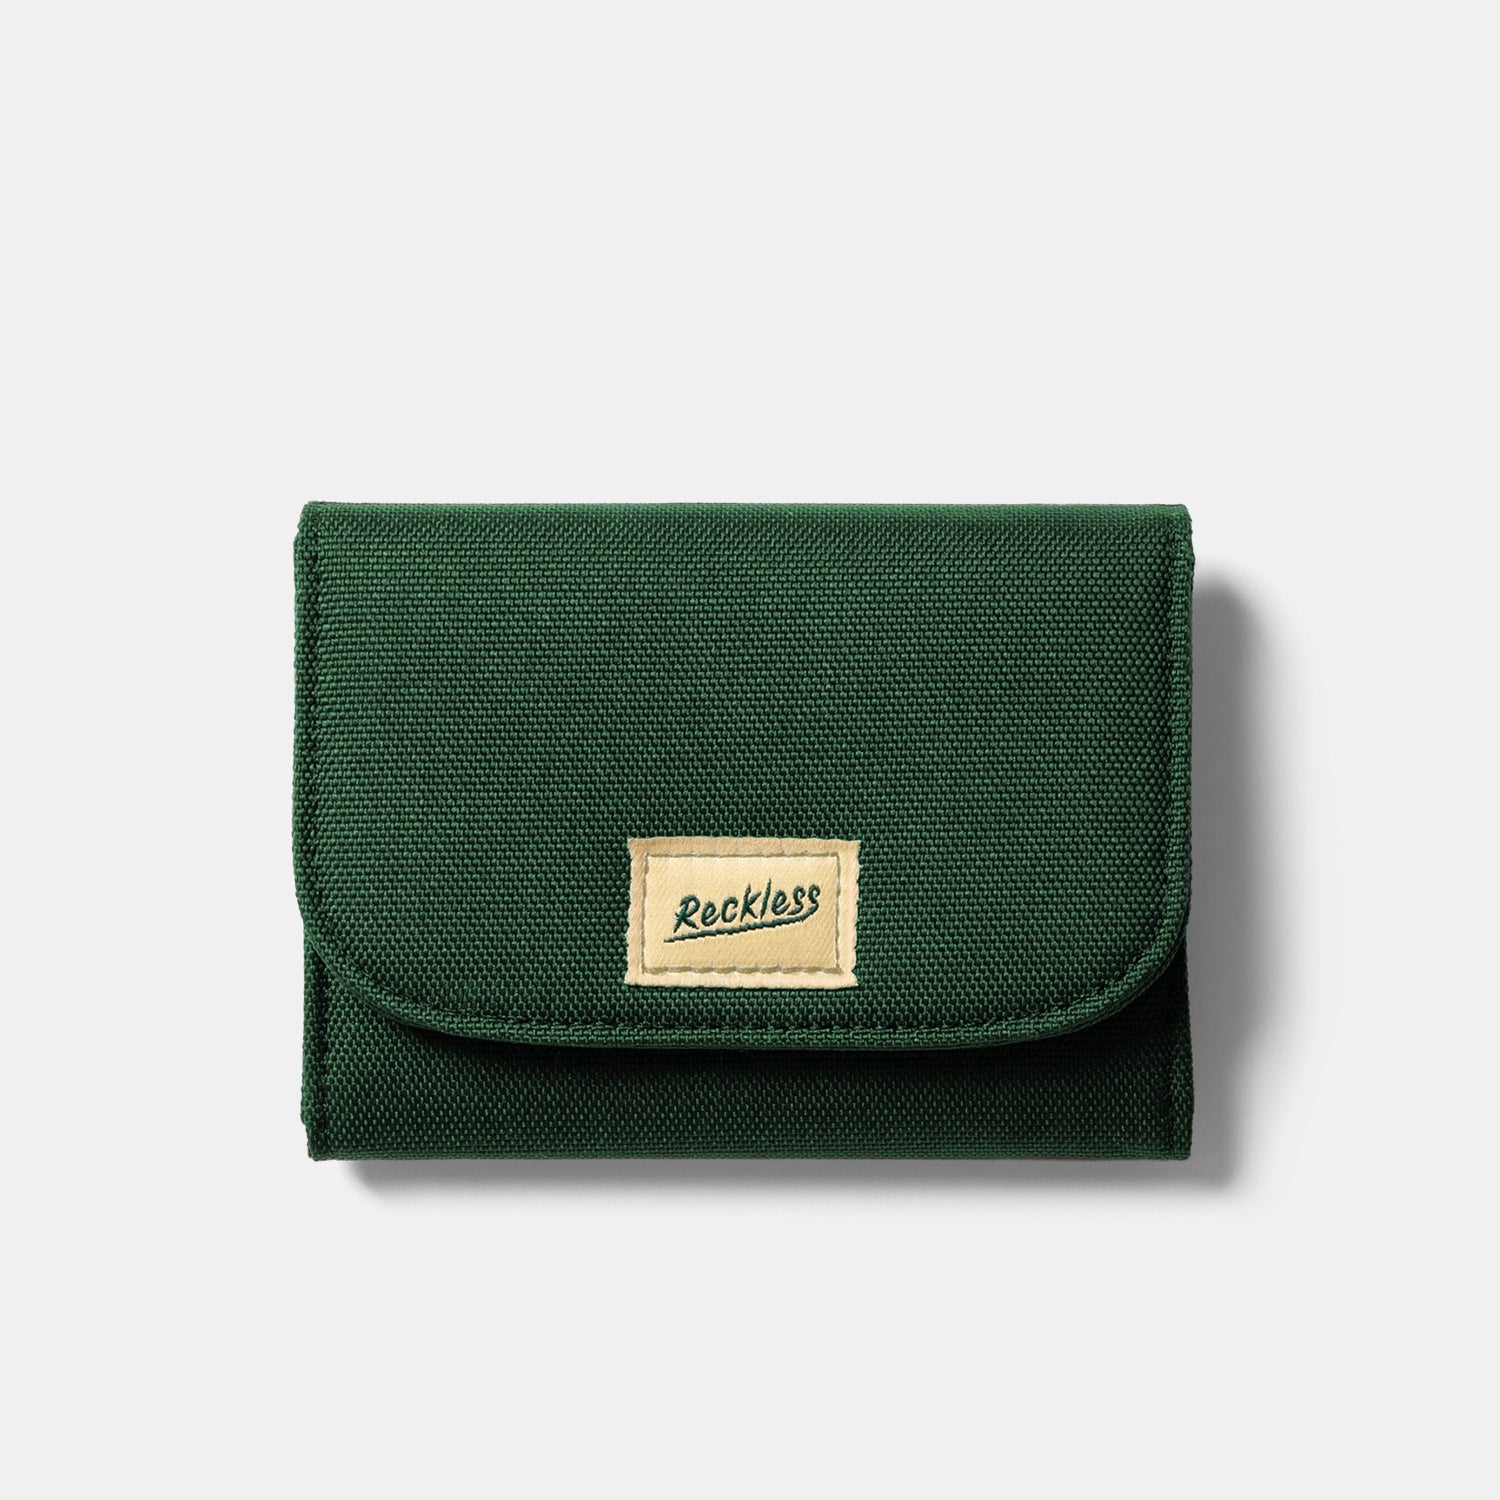 Ví Claire Wallet